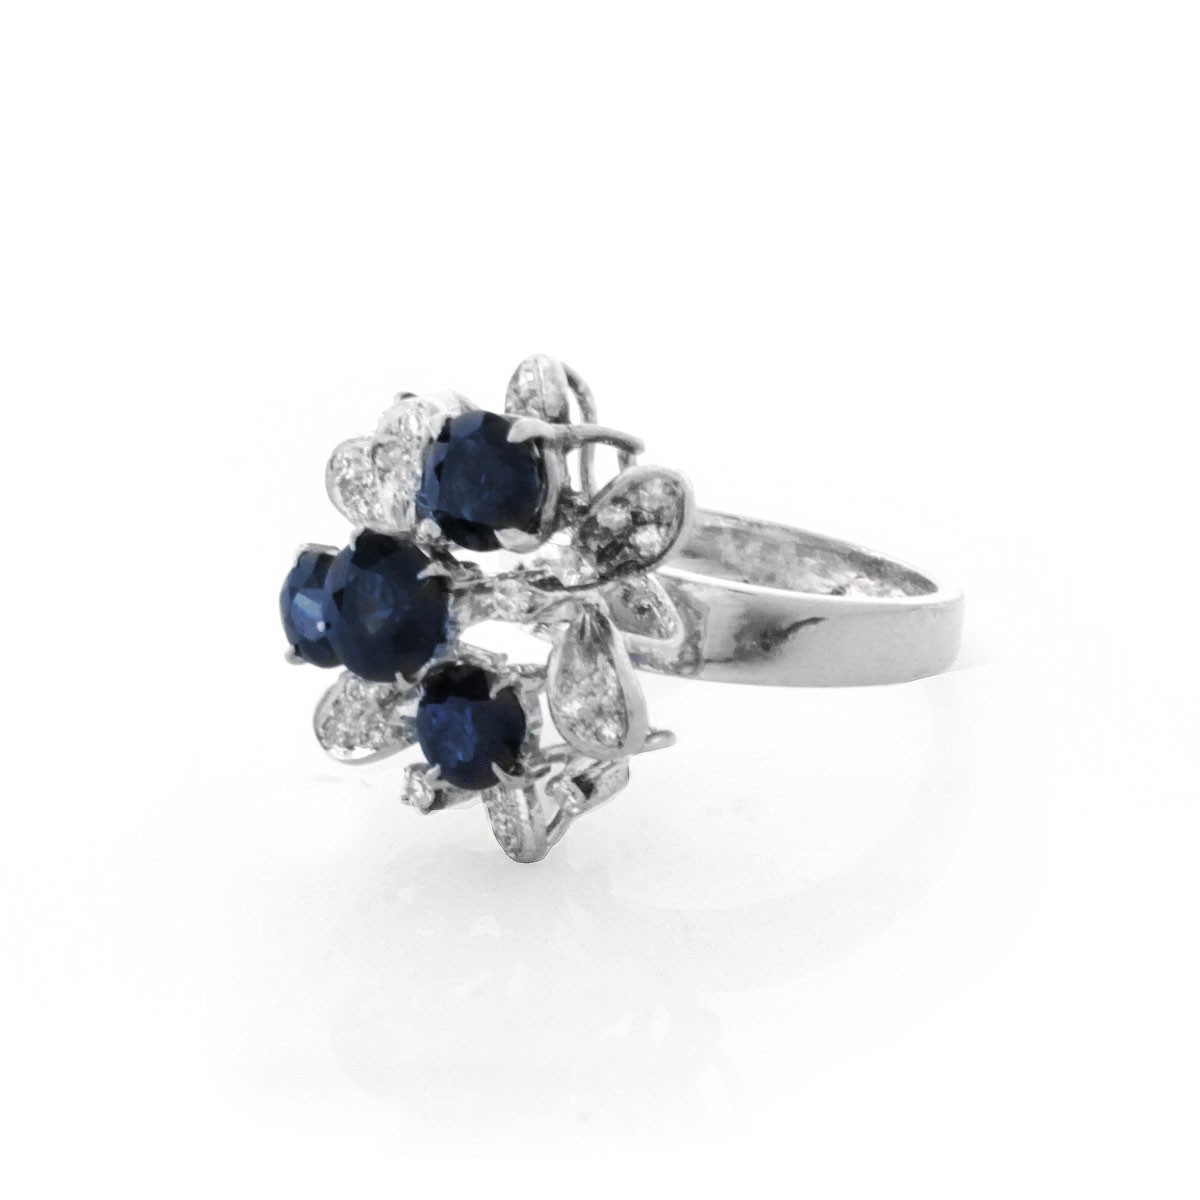 Vintage Sapphire, Diamond and 18K Gold Ring - Image 3 of 7